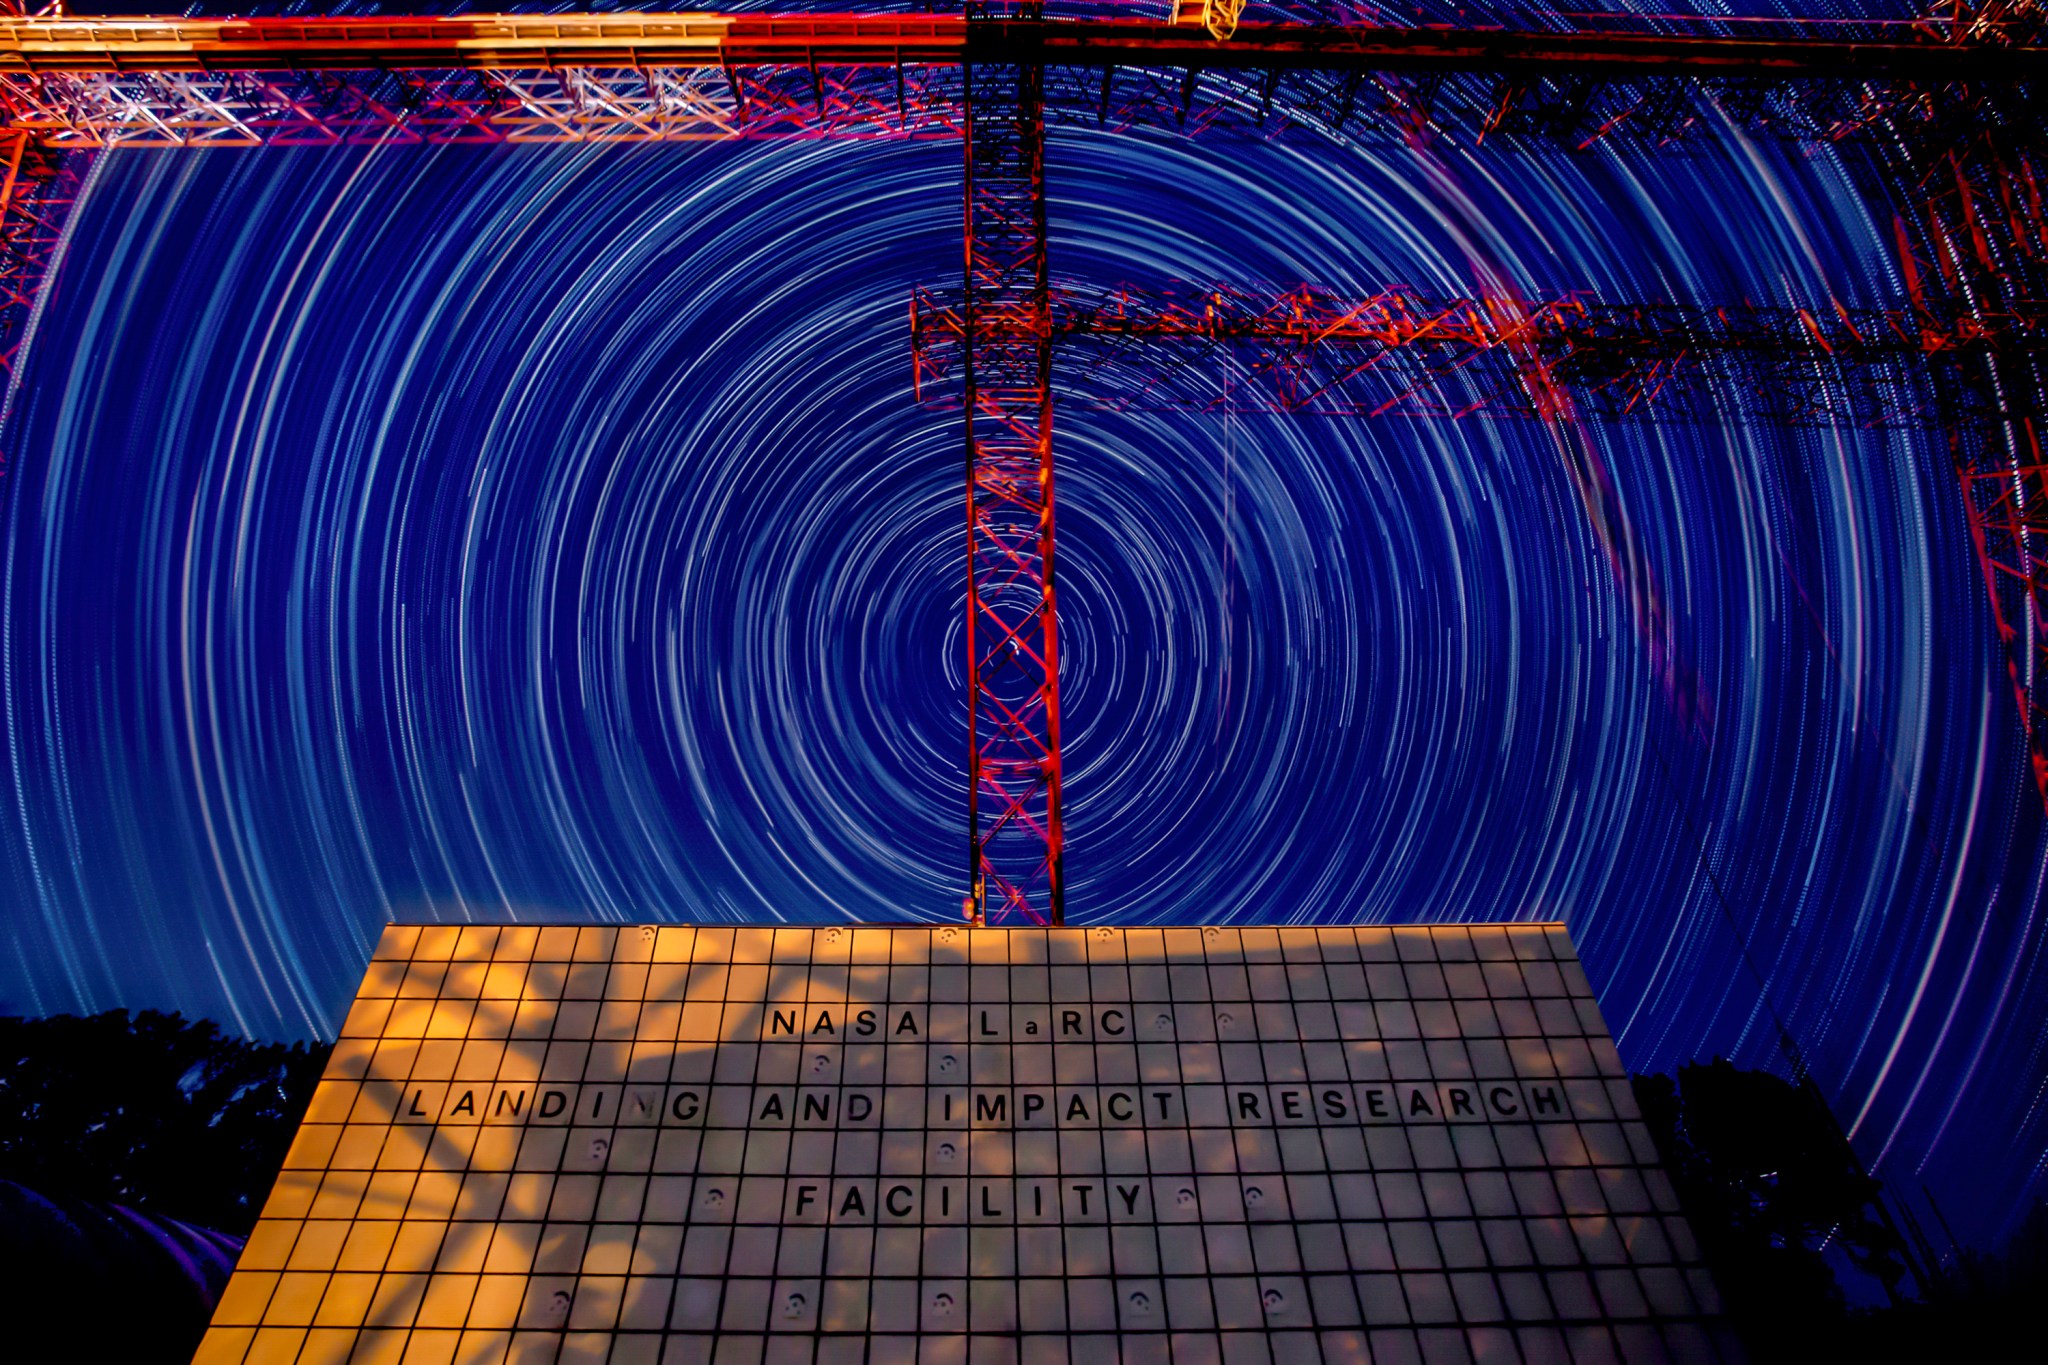 This is a time-lapse still photograph of night time over the gantry at NASA Langley Research Center. Stars appear to swirl in a circle over the gantry against the dark blue night sky.